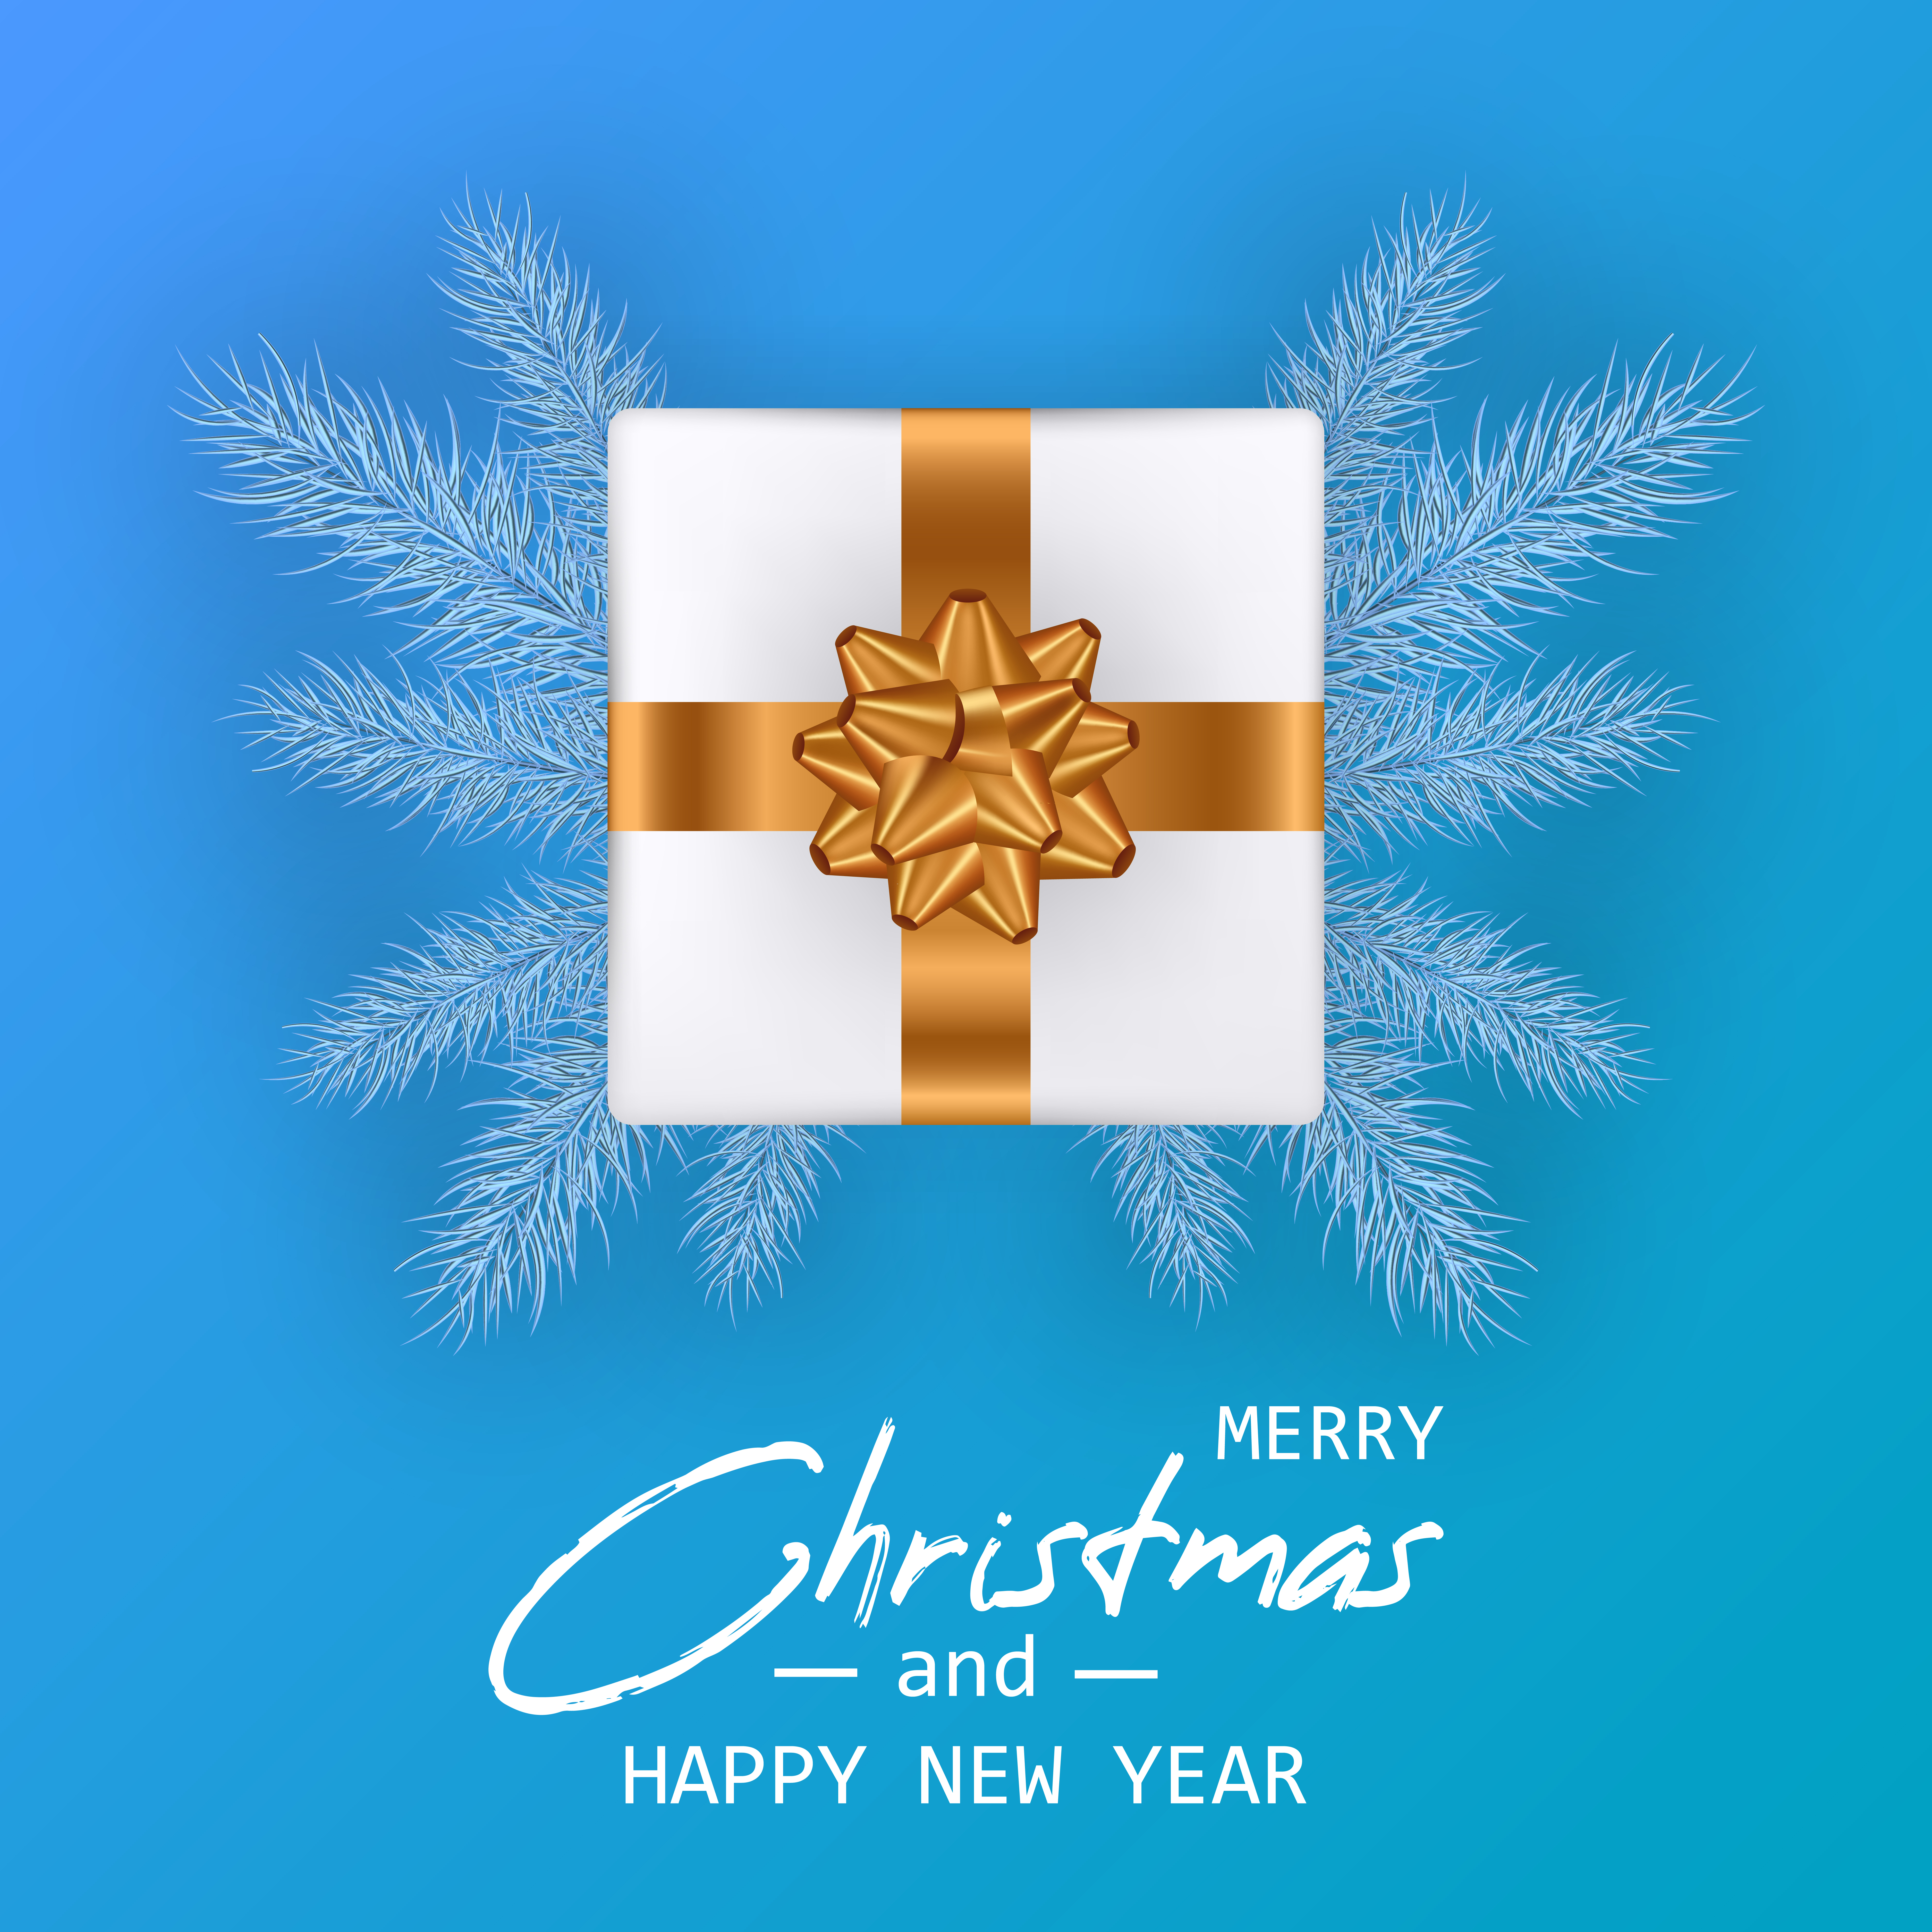 Marry Christmas and Happy New Year card. Christmas banner.